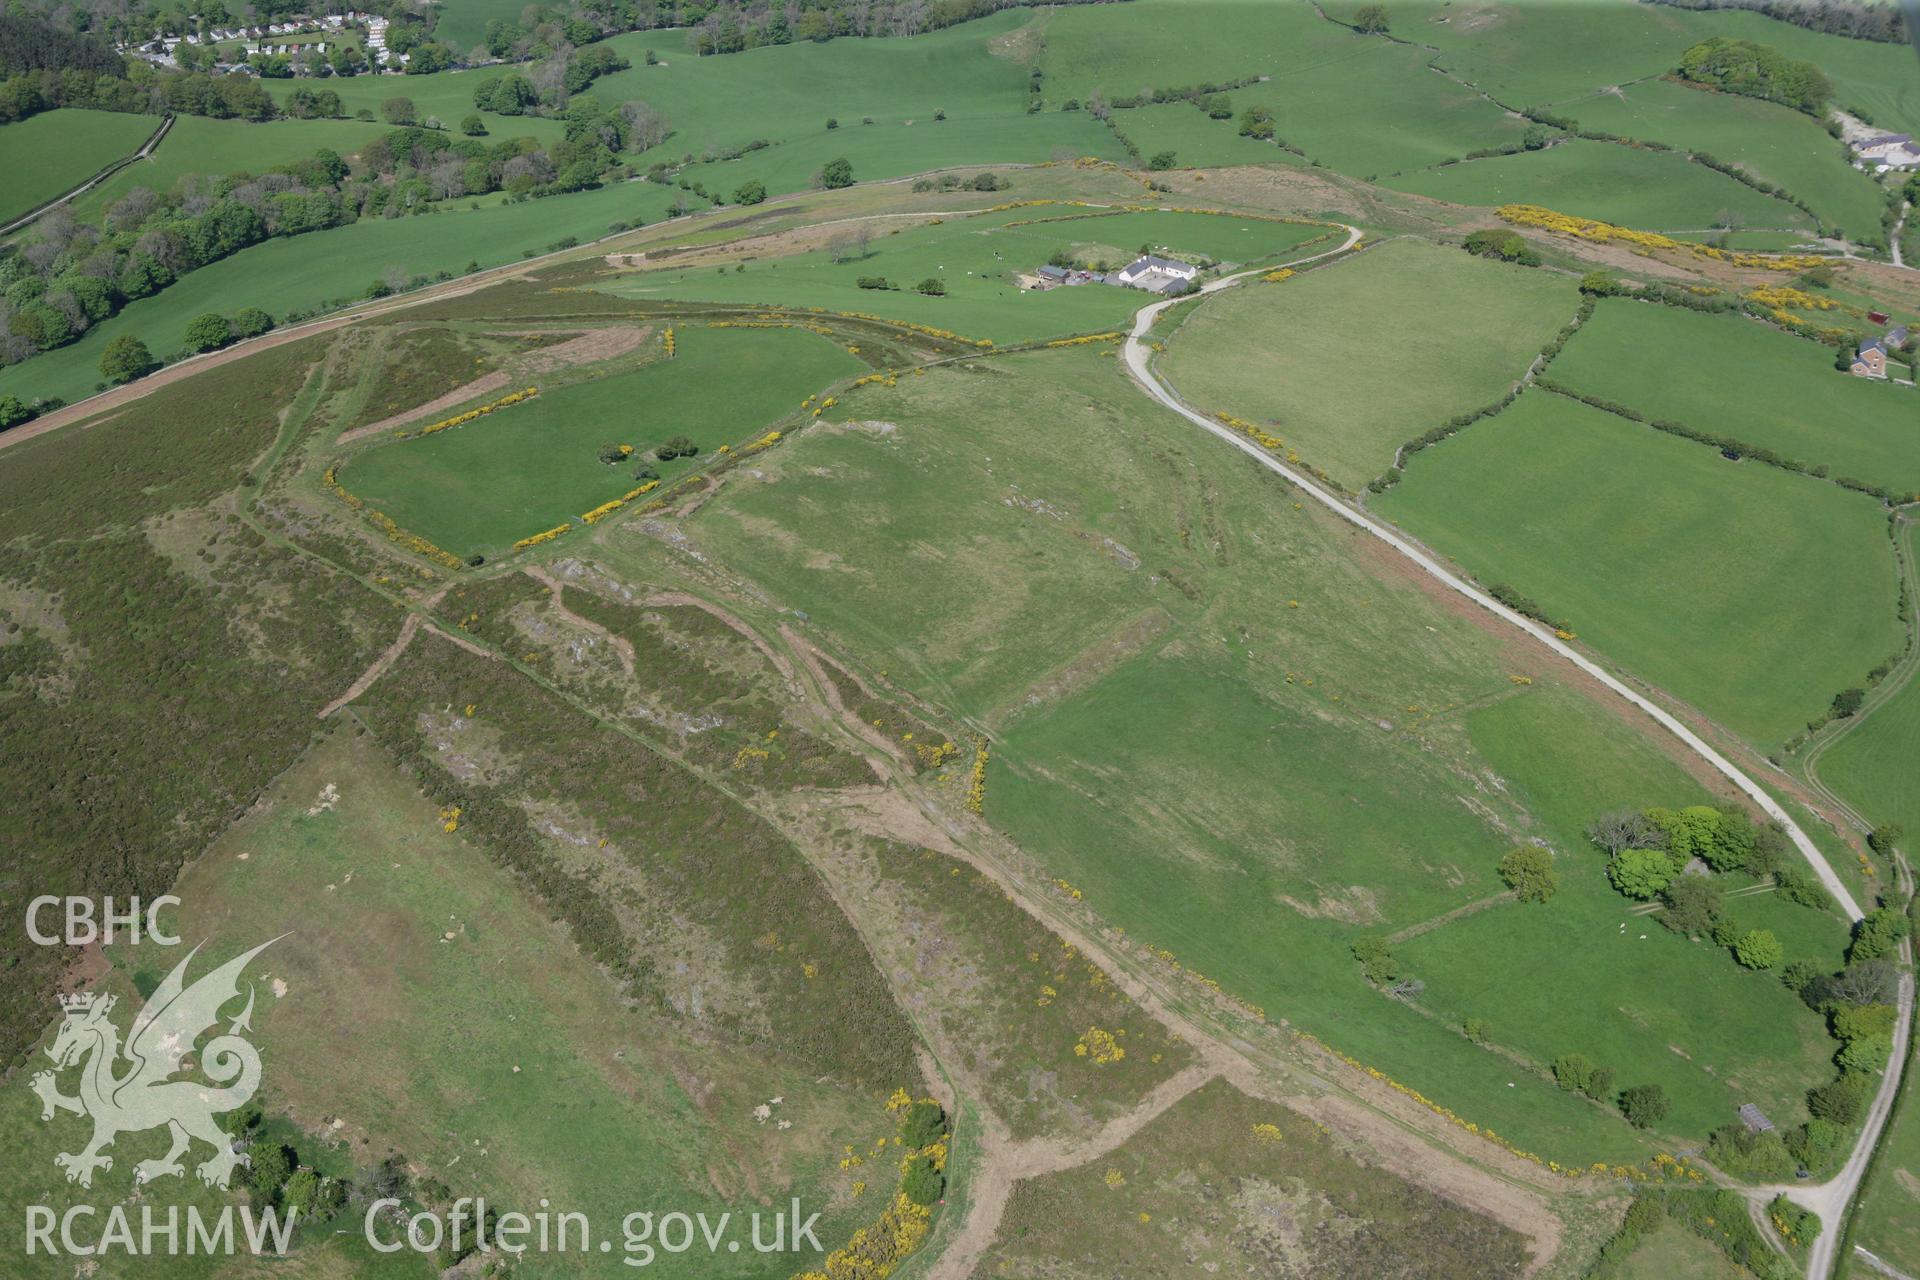 RCAHMW colour oblique photograph of Mynydd-y-Gaer Hillfort. Taken by Toby Driver on 03/05/2011.